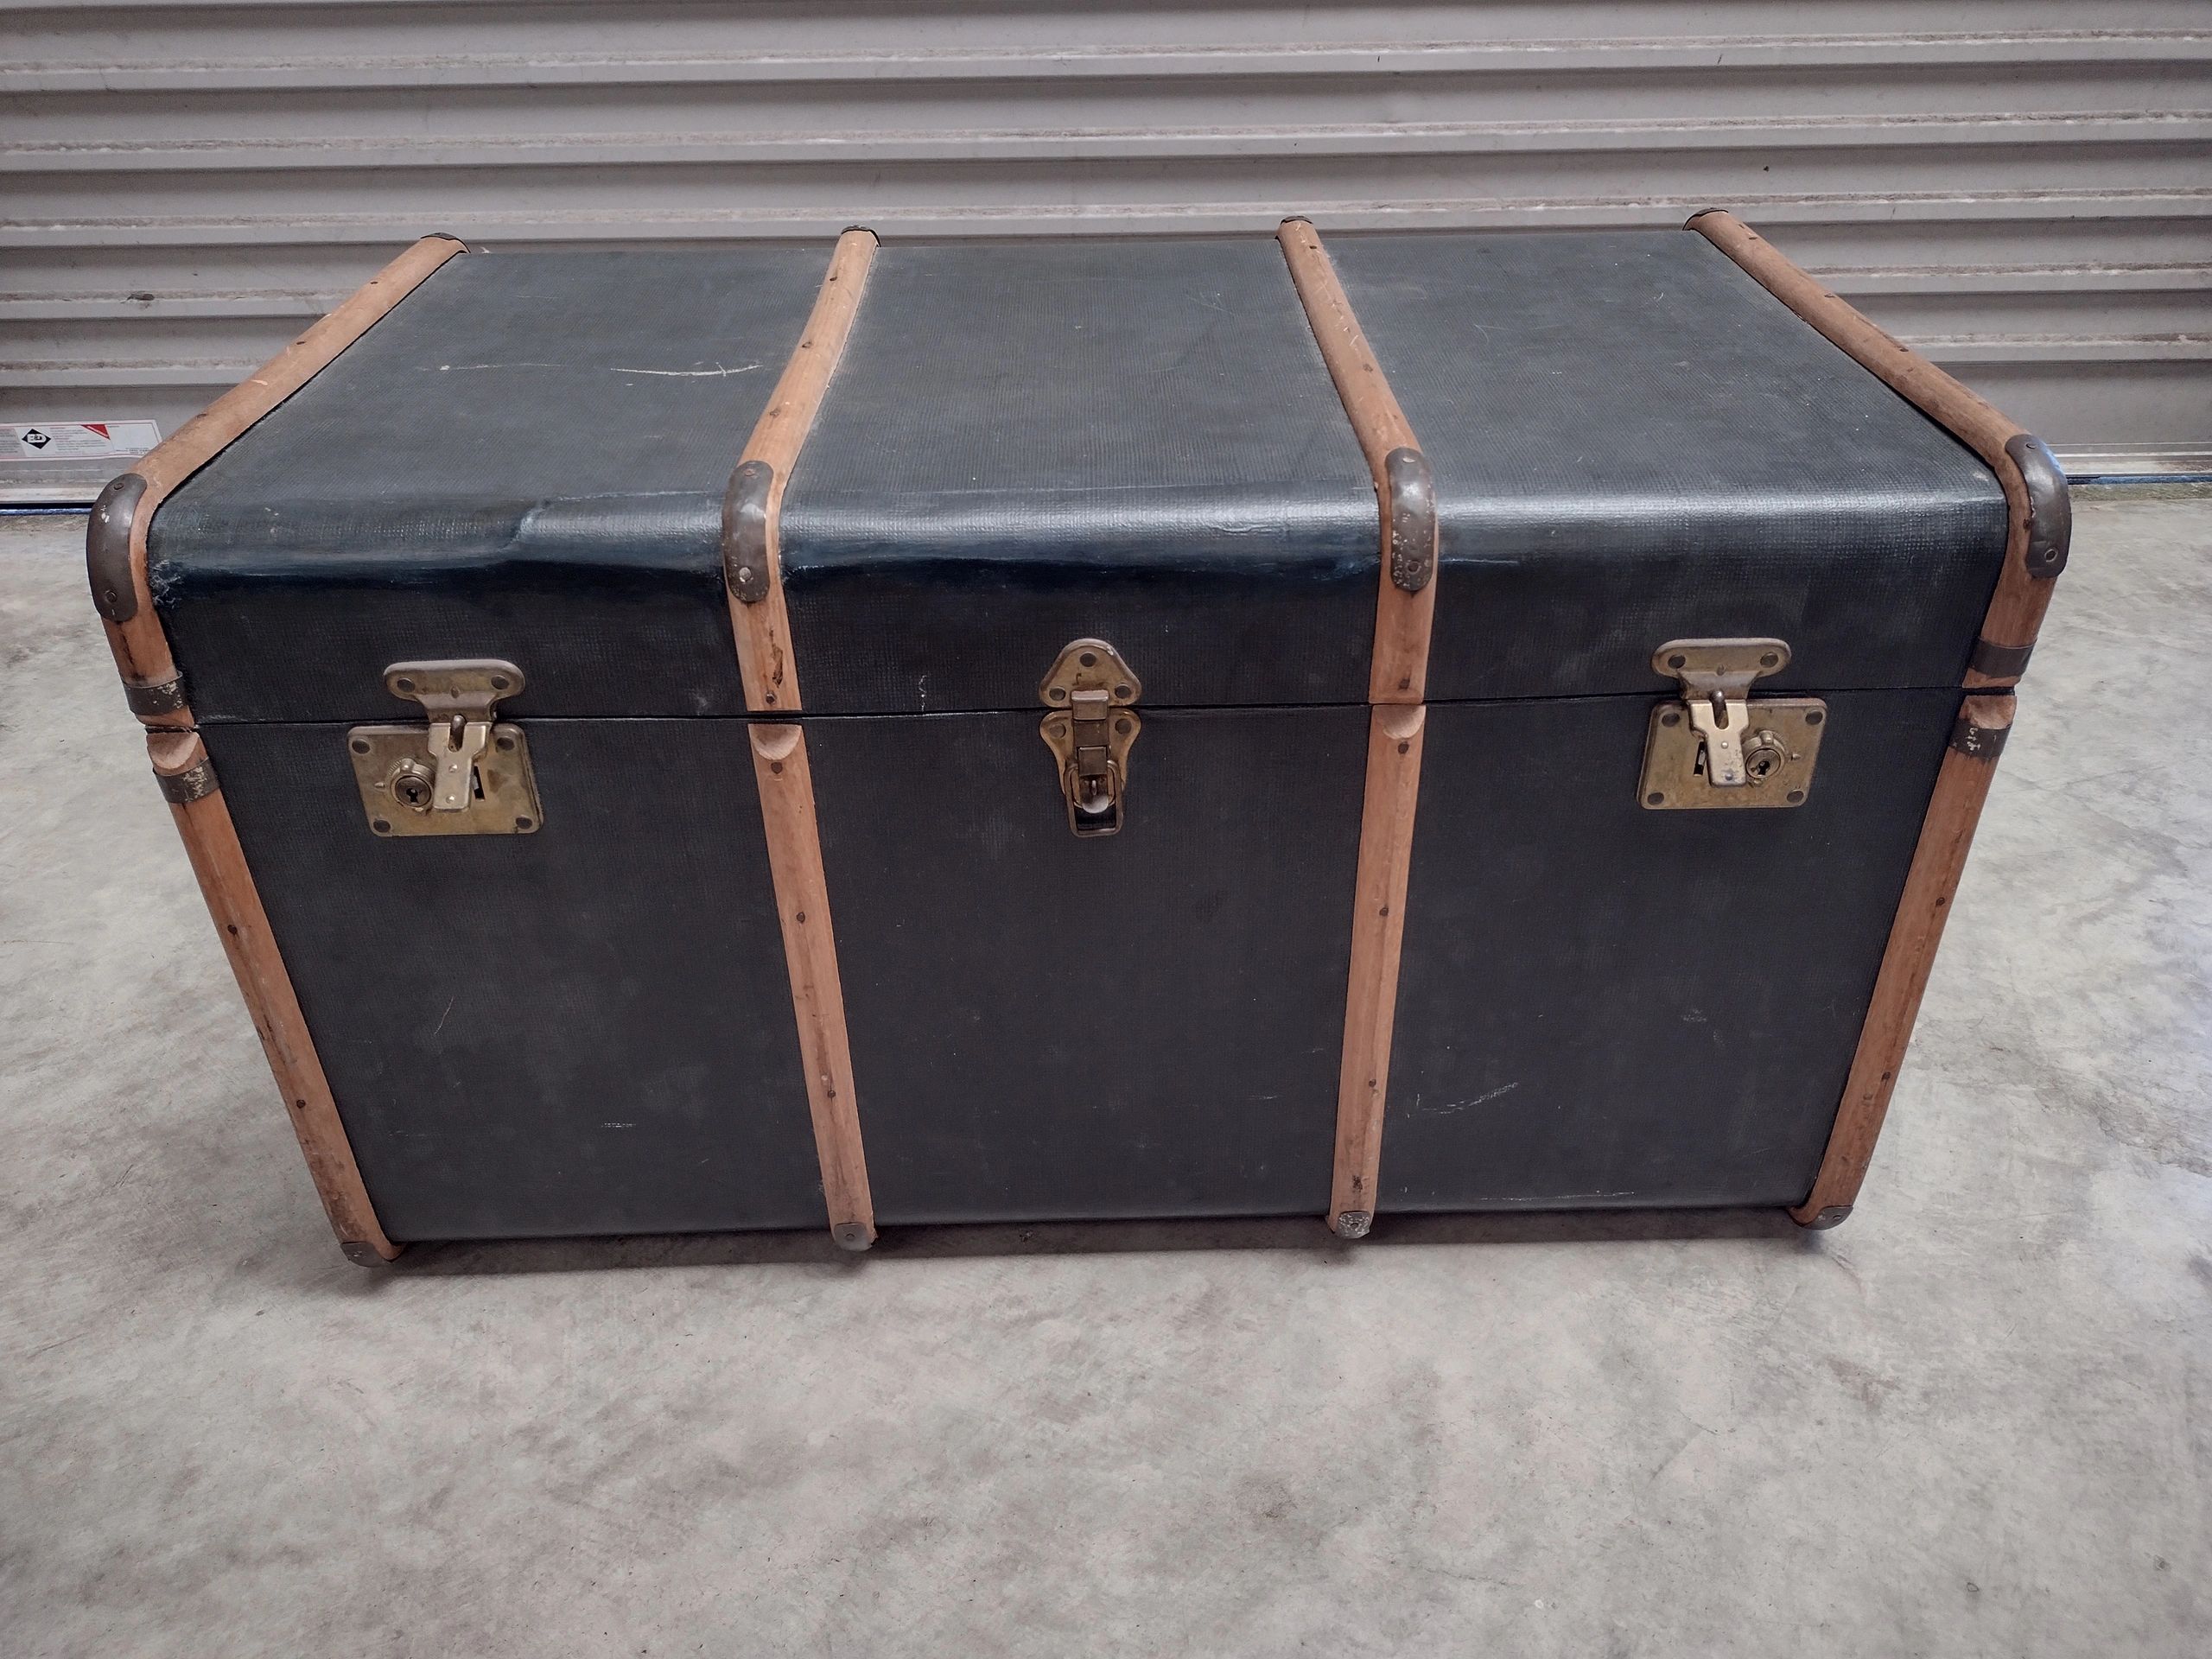 Mid-century passenger trunks as used when sea travel was dominant.
Repairs the damaged lid.

.